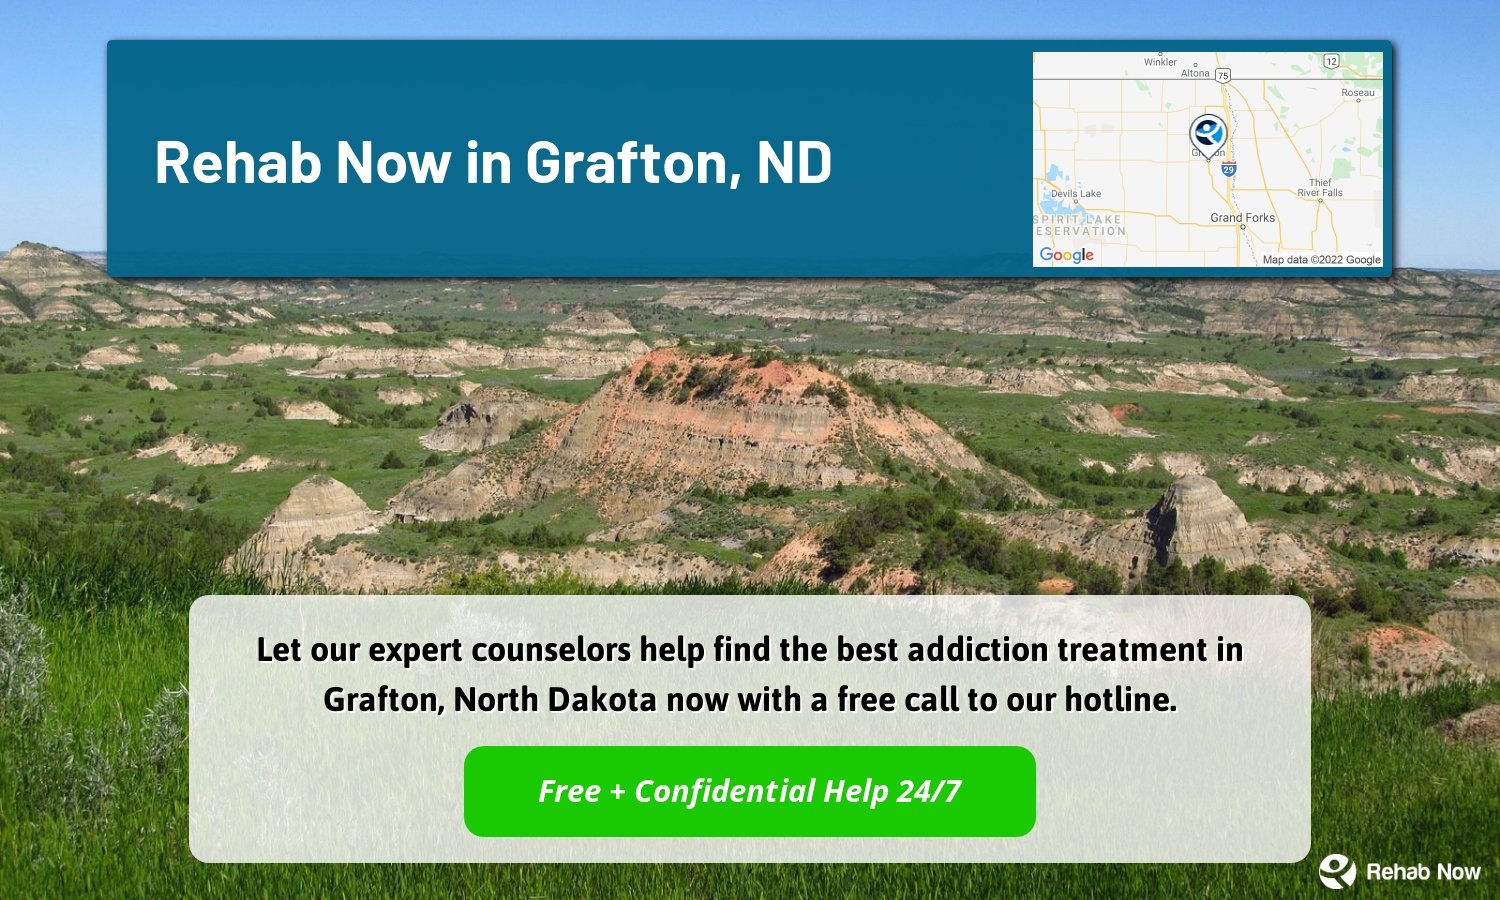 Let our expert counselors help find the best addiction treatment in Grafton, North Dakota now with a free call to our hotline.